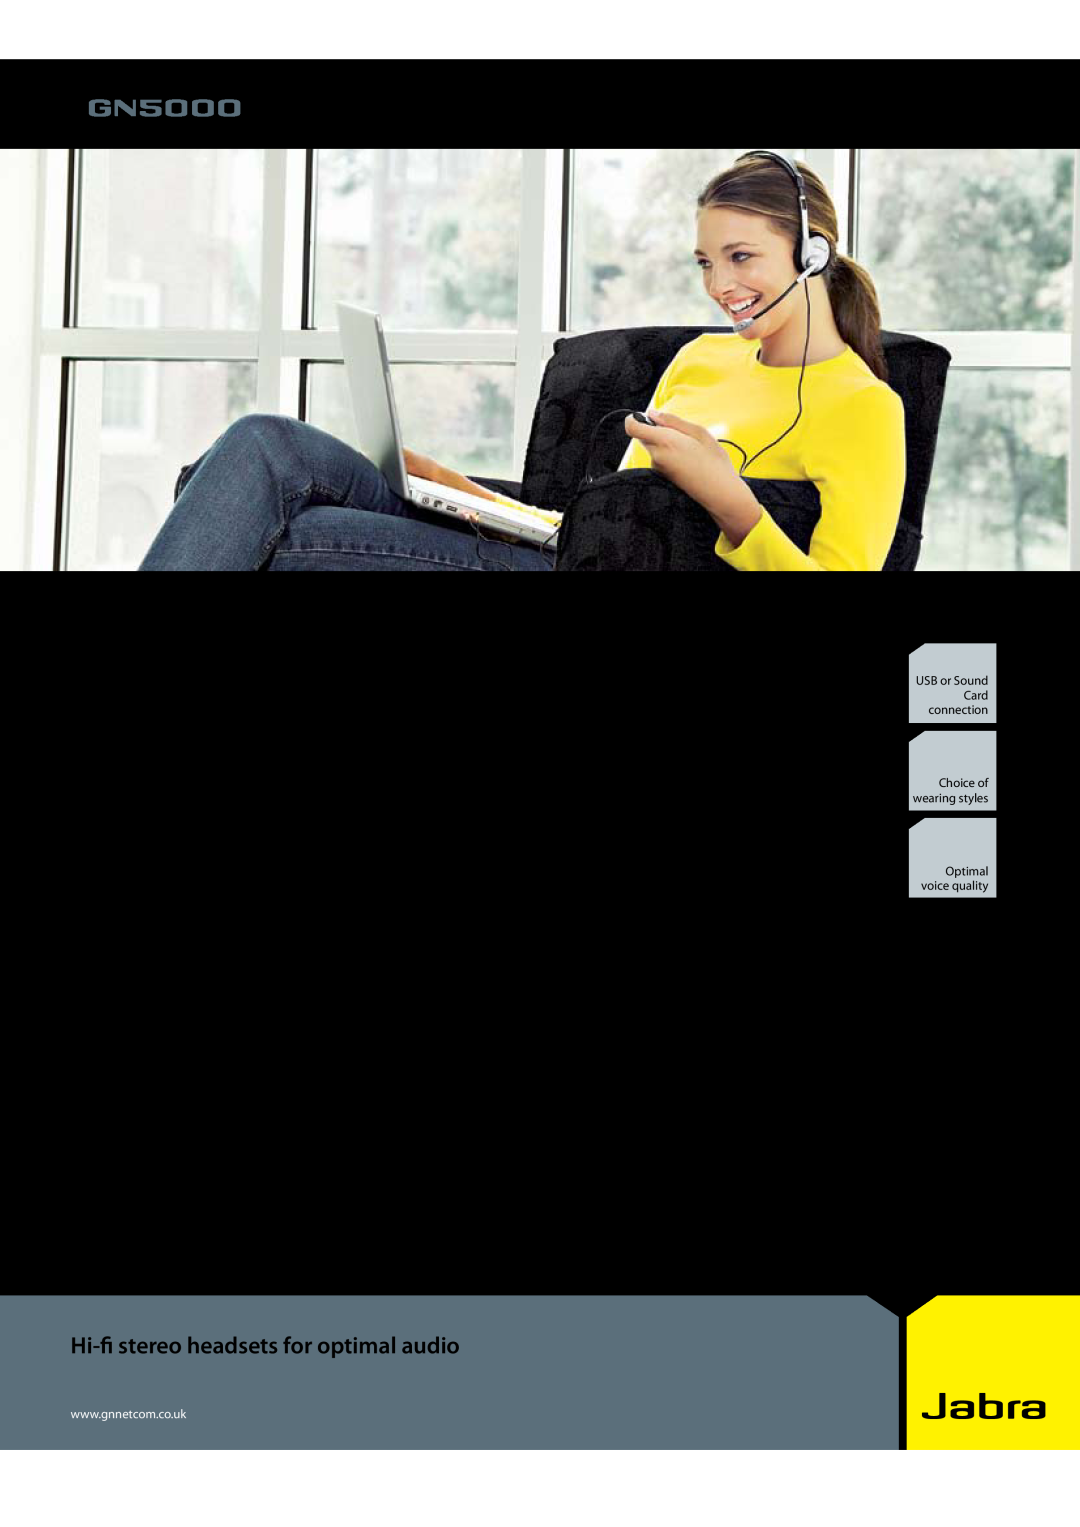 Jabra GN5010 manual Enhance your PC audio experience, Hi-fistereo headsets for optimal audio 